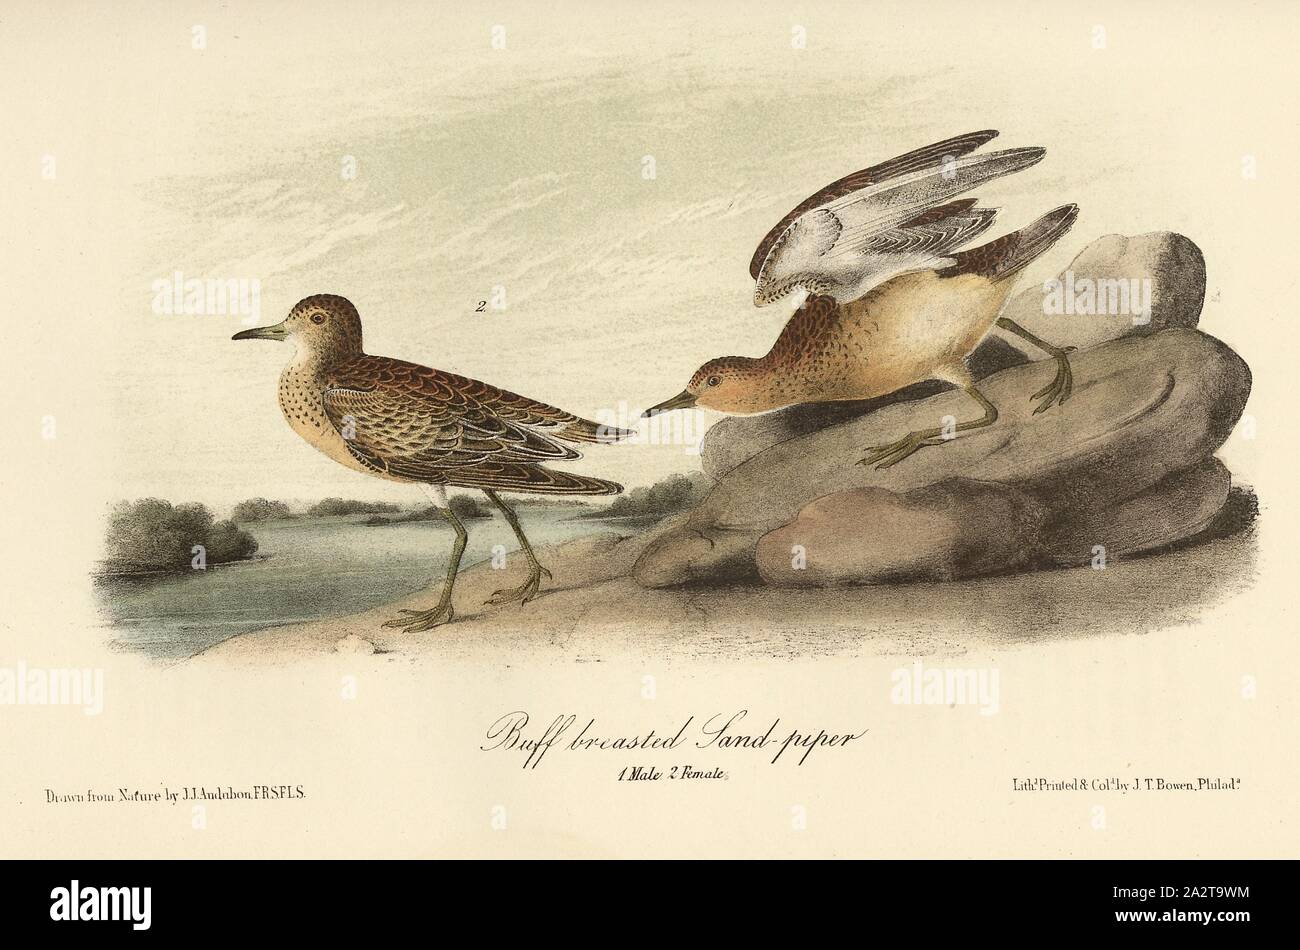 Buff-breasted Sandpiper, Grasshopper (Tryngites subruficollis, Tringa rufescens), Signed: J.J. Audubon, J.T. Bowen, Lithograph, Pl. 331 (Vol. 5), Audubon, John James (drawn); Bowen, J. T. (lith.), 1856, John James Audubon: The birds of America: from drawings made in the United States and their territories. New York: Audubon, 1856 Stock Photo